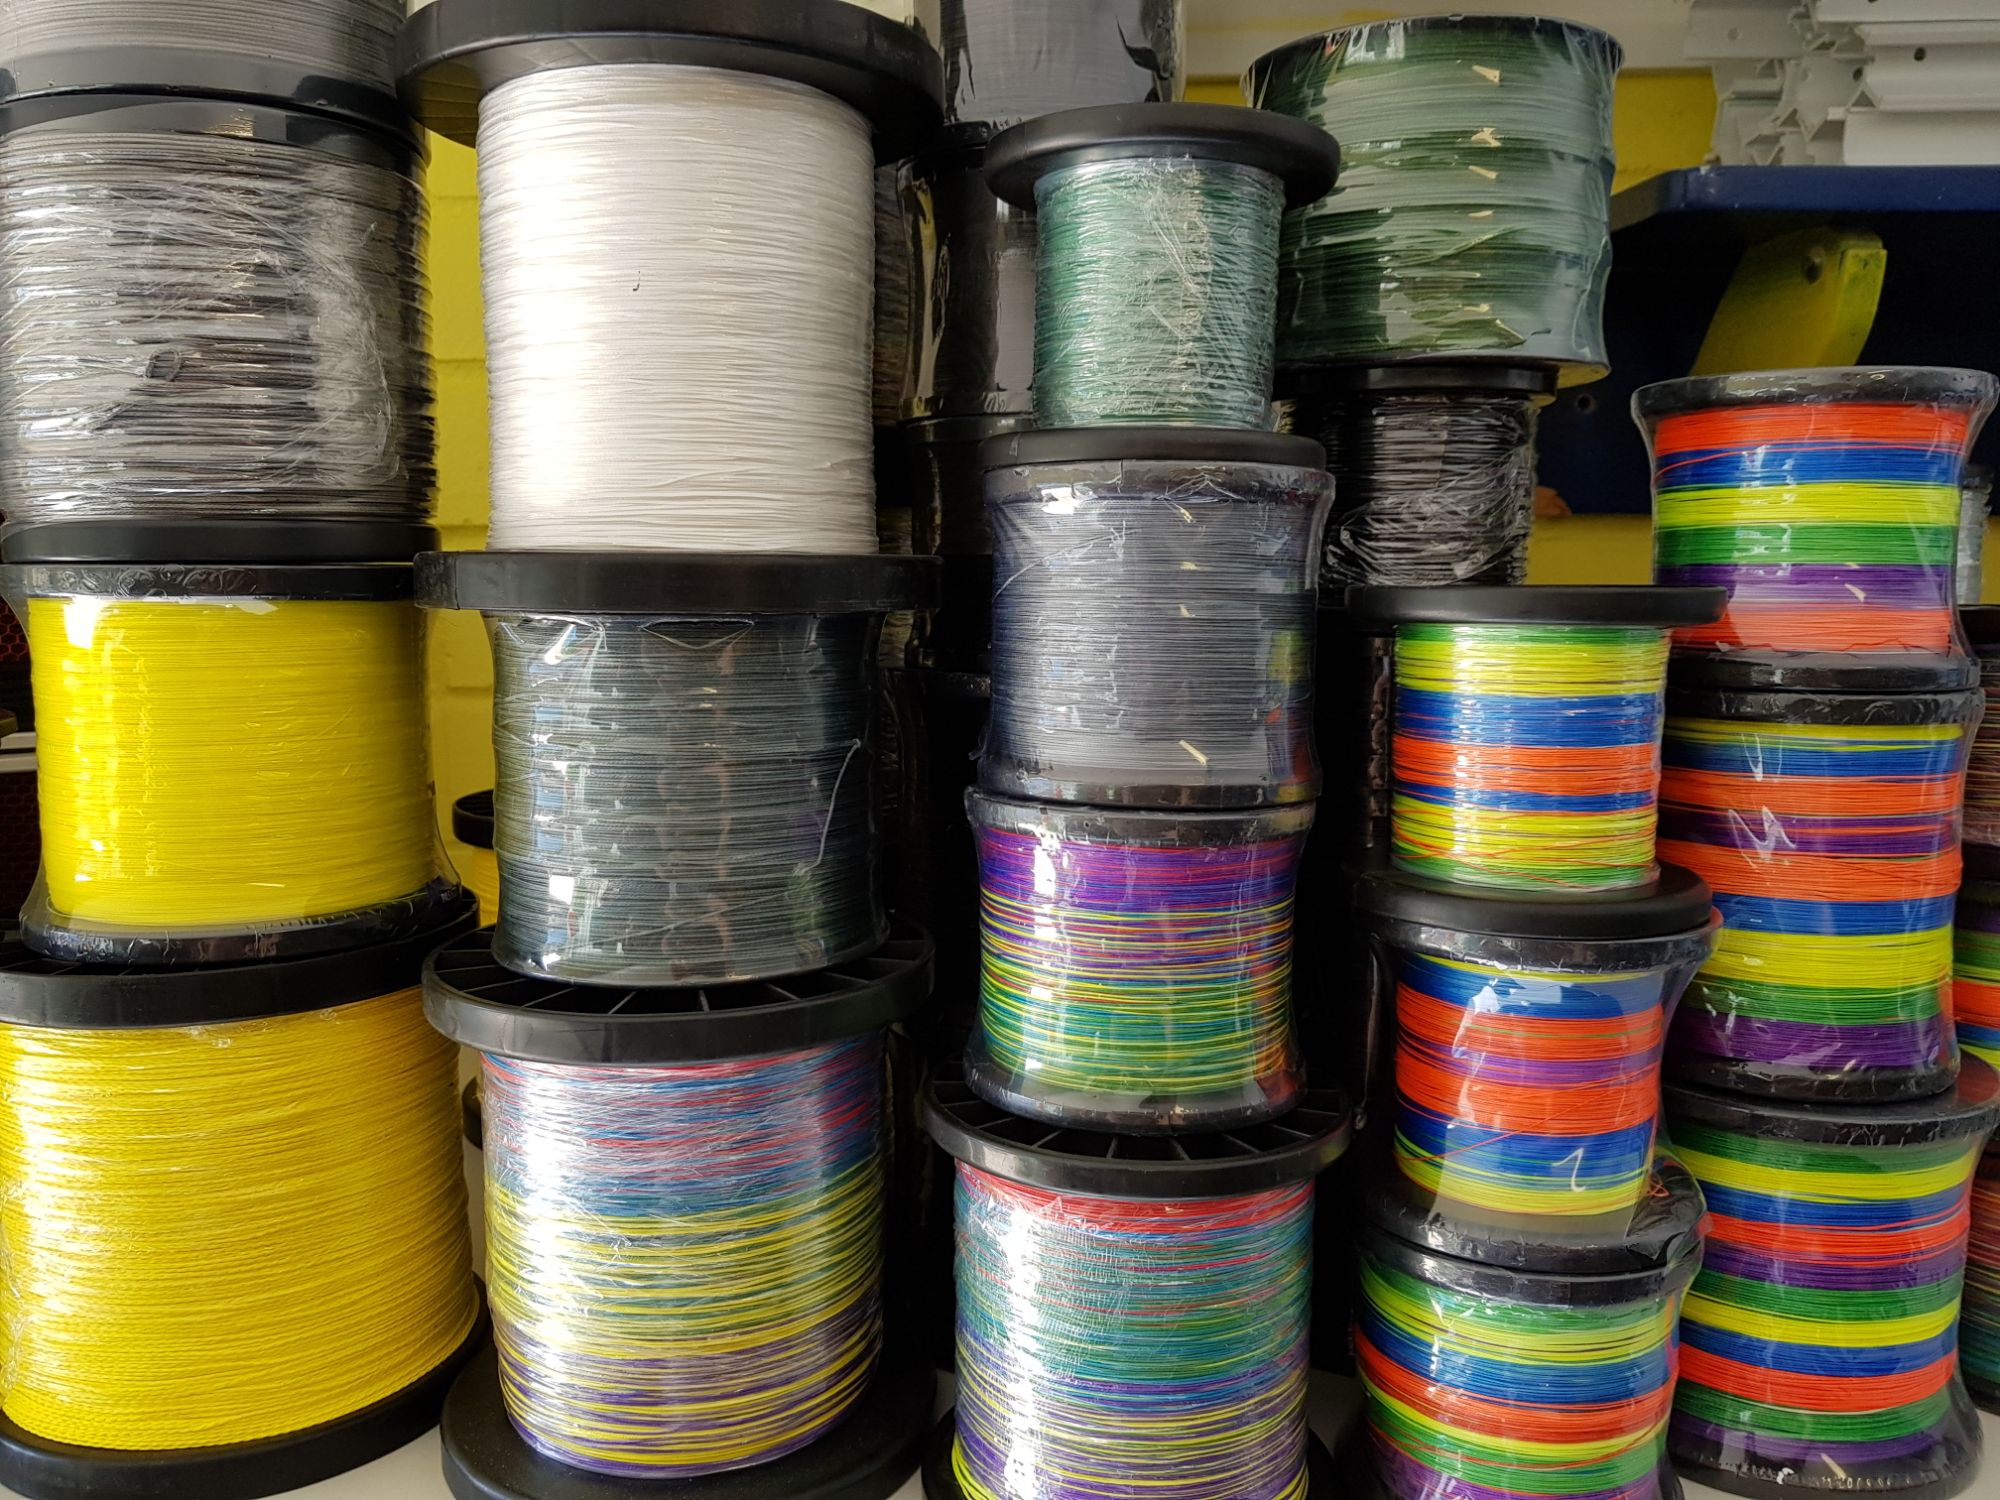 Commercial and Amateur Fishing Lines For Sale in Perth, Western Australia